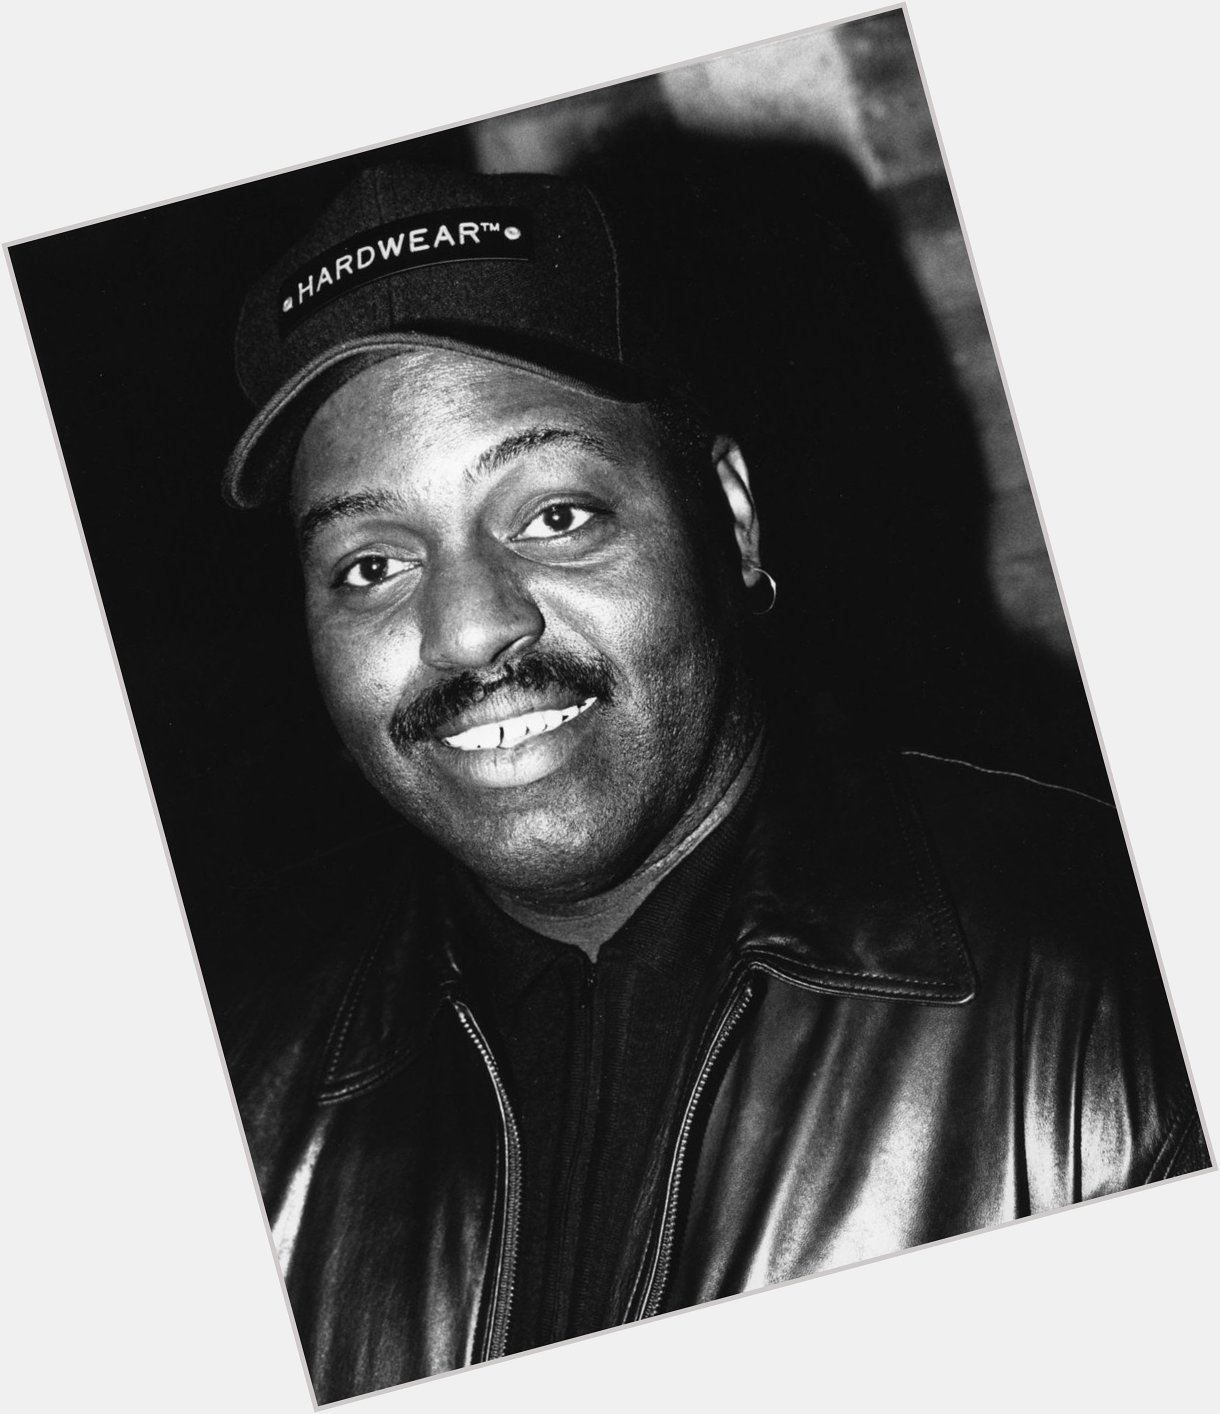 Happy birthday to Frankie Knuckles, The Godfather of House Music 